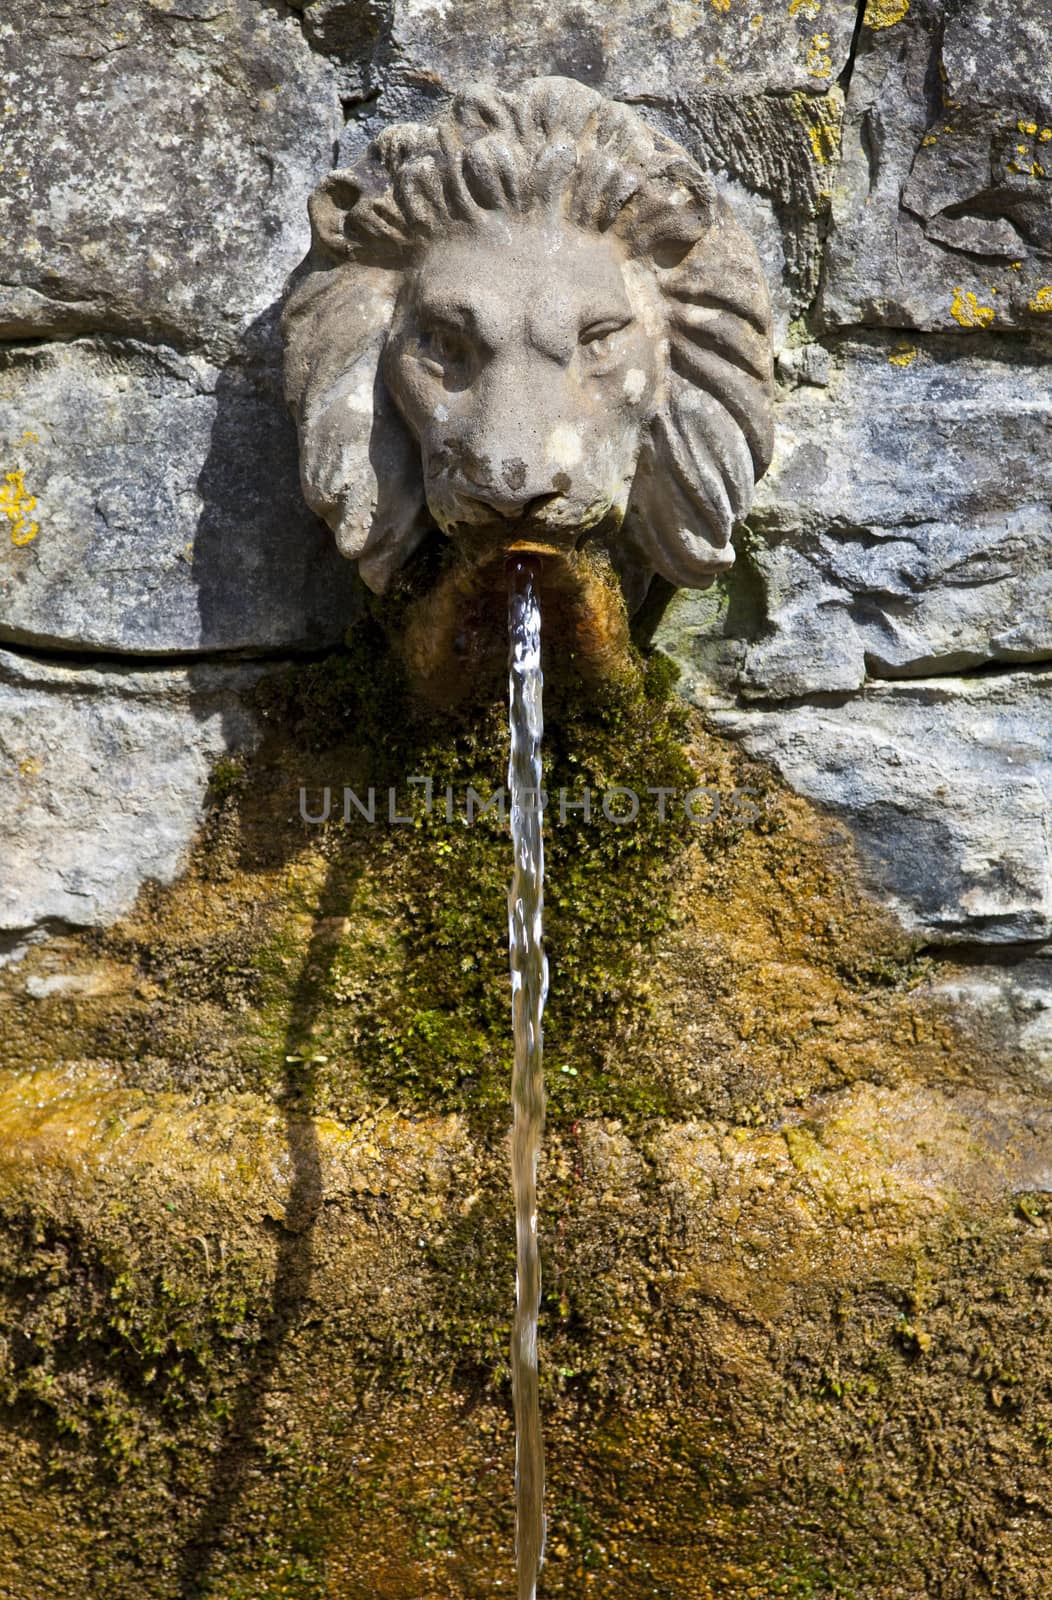 The Lion's Head Drinking Fountain at the Chalice Well in Glastonbury.